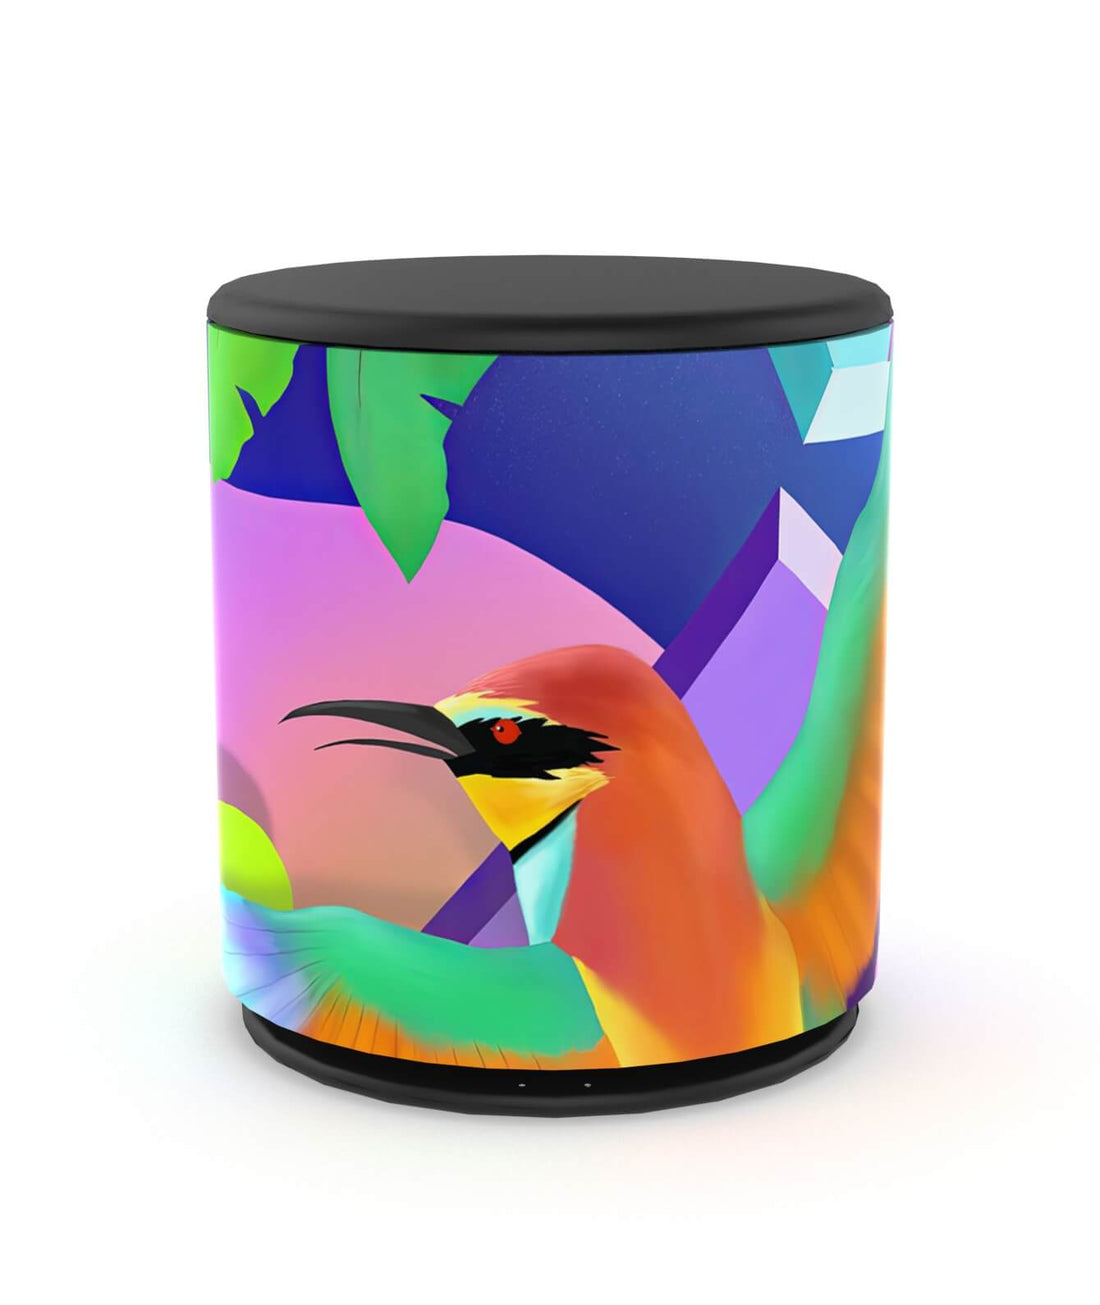 Skiniplay x James Smith - Cover Tropical Invasion for Bang & Olufsen Beoplay M5 speaker